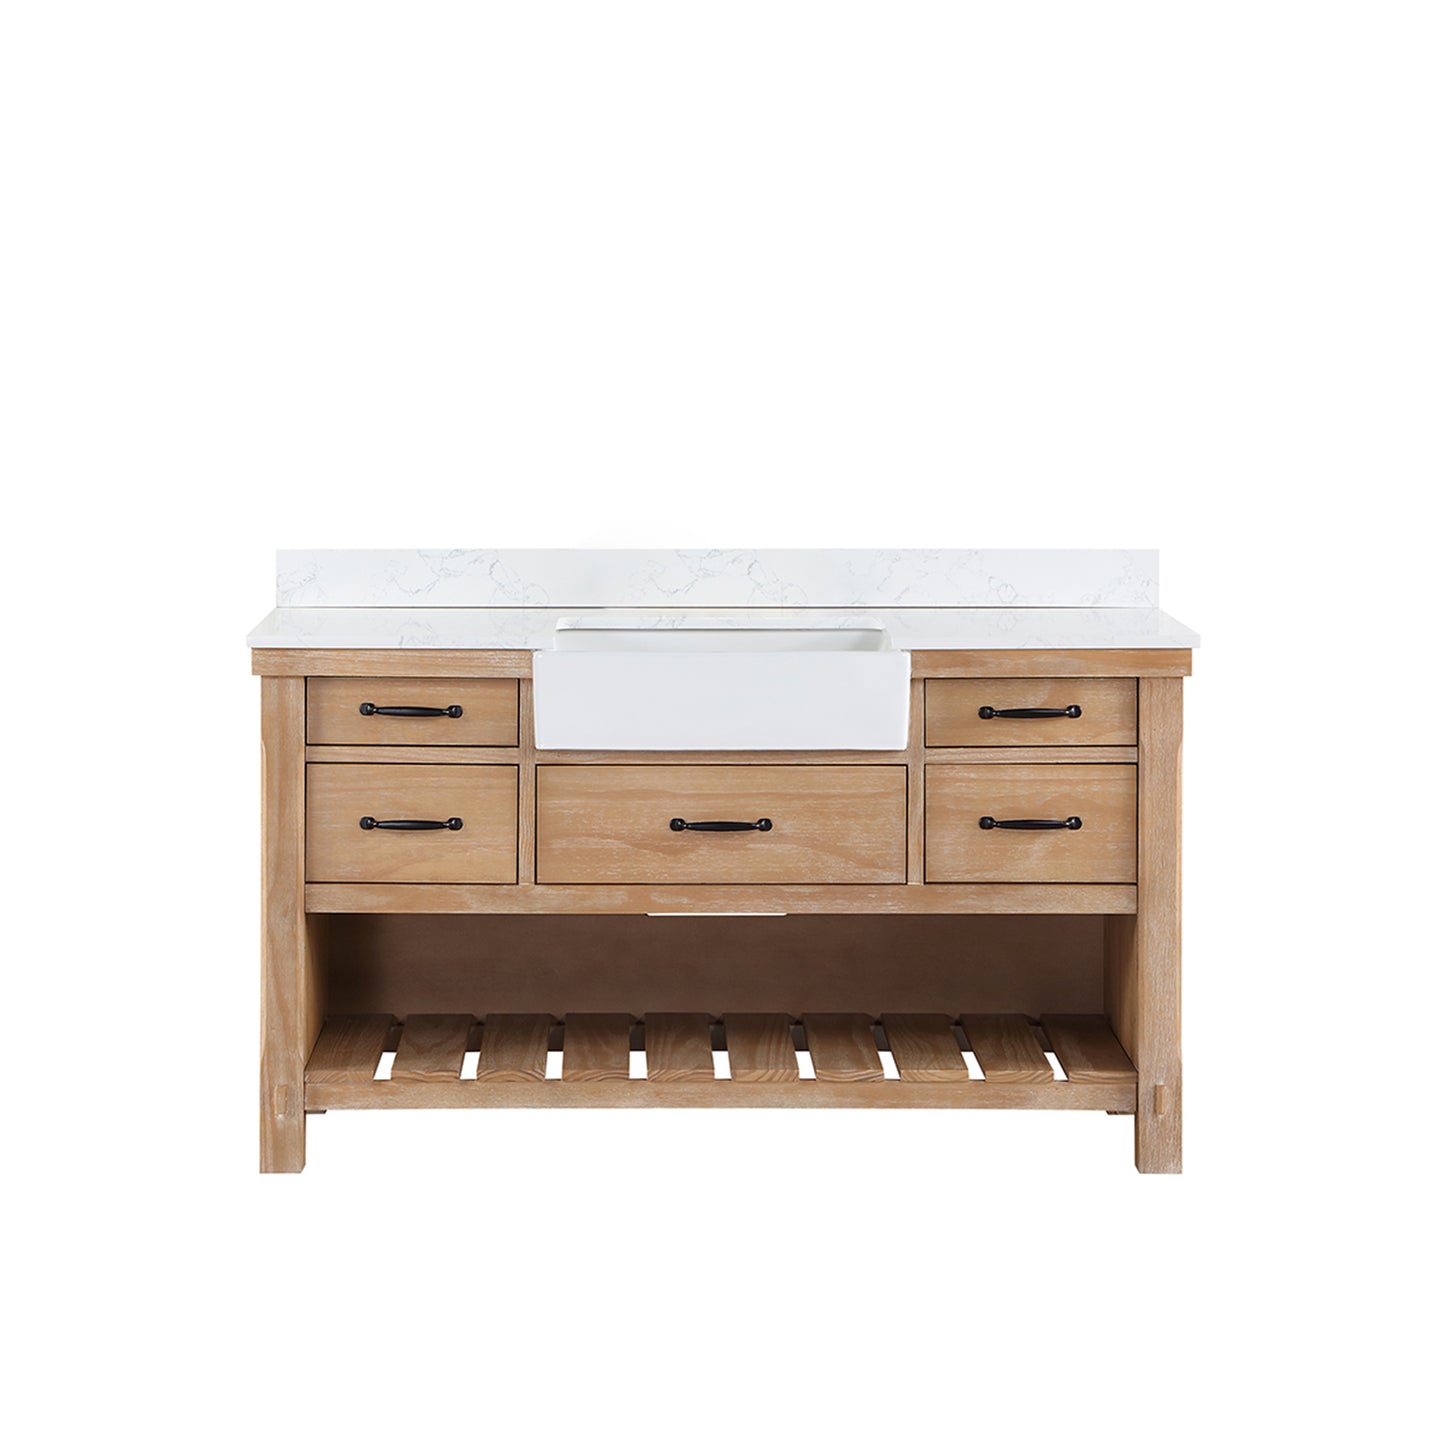 Villareal 60" Single Bath Vanity in Weathered Pine with Composite Stone Top in White, White Farmhouse Basin